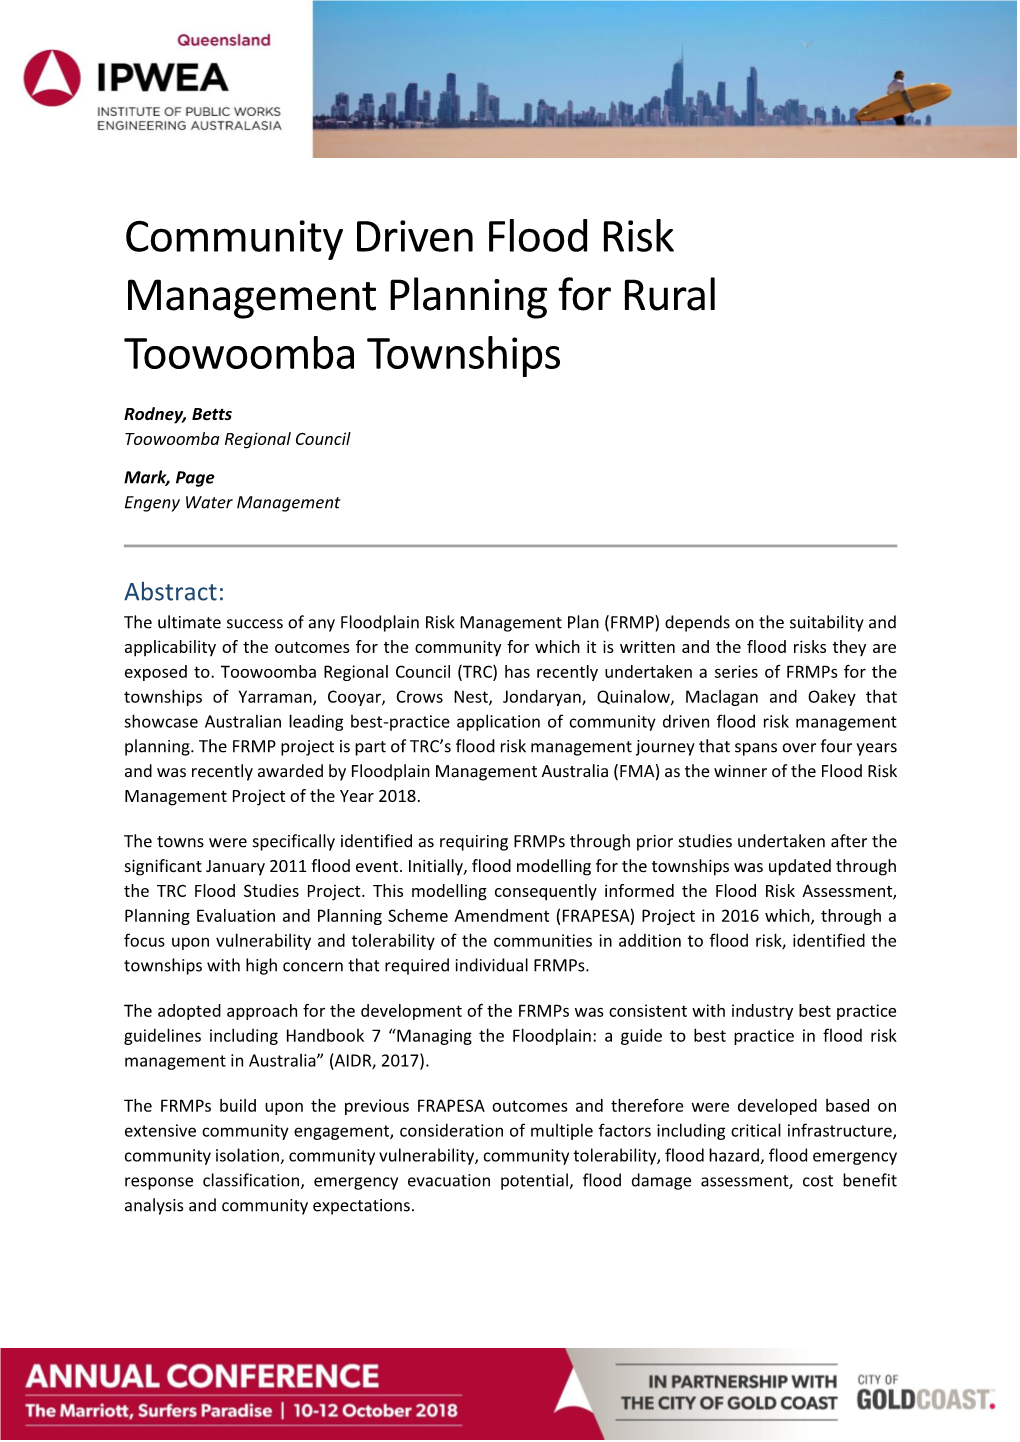 Community Driven Flood Risk Management Planning for Rural Toowoomba Townships